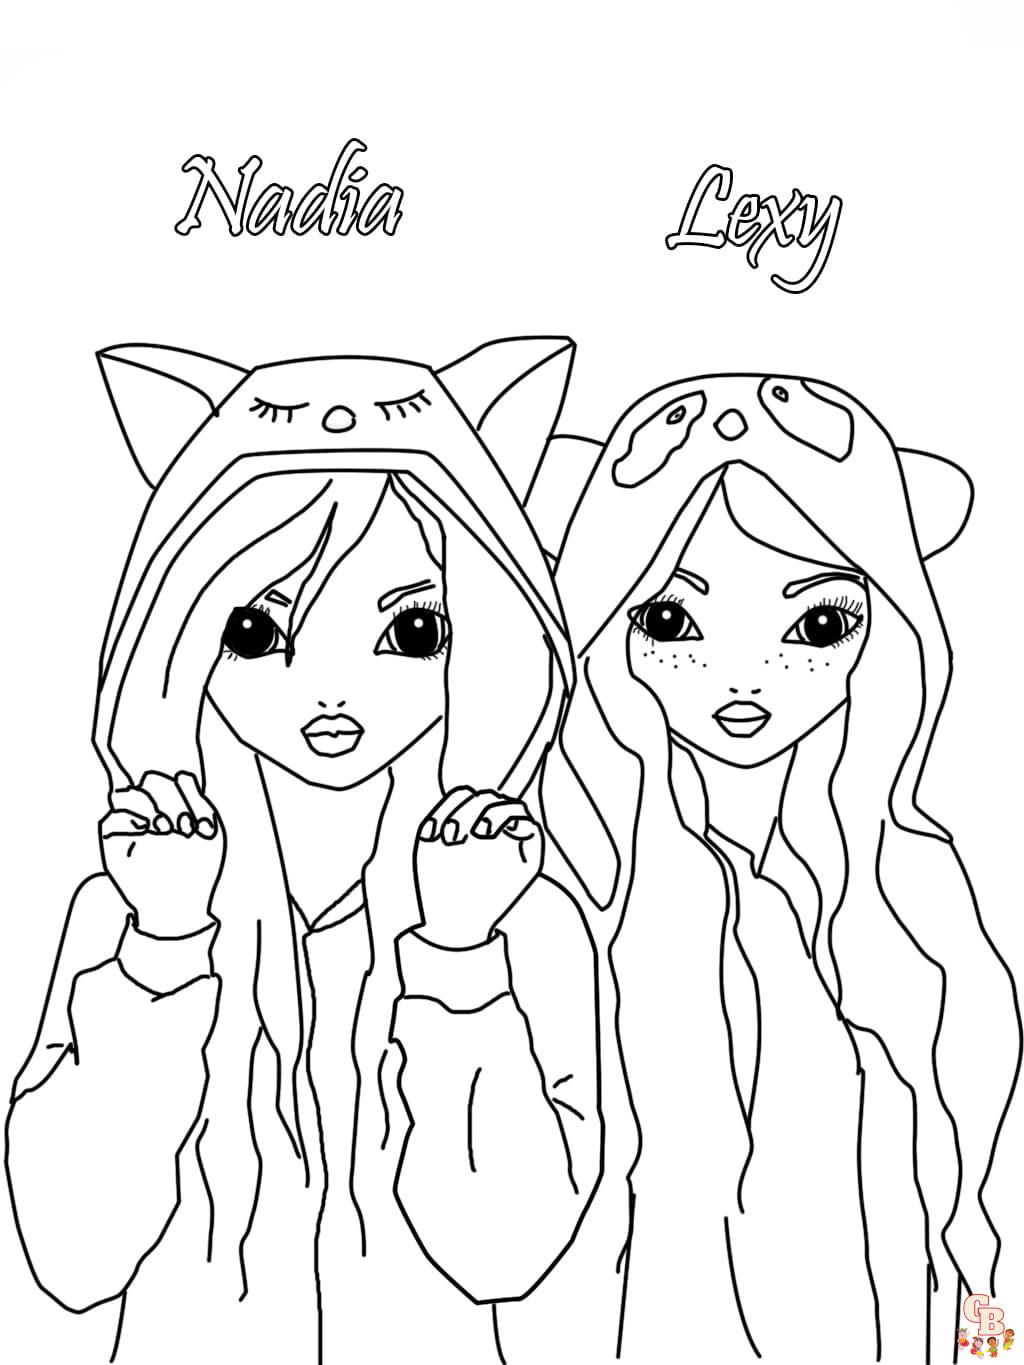 Coloriage BFF